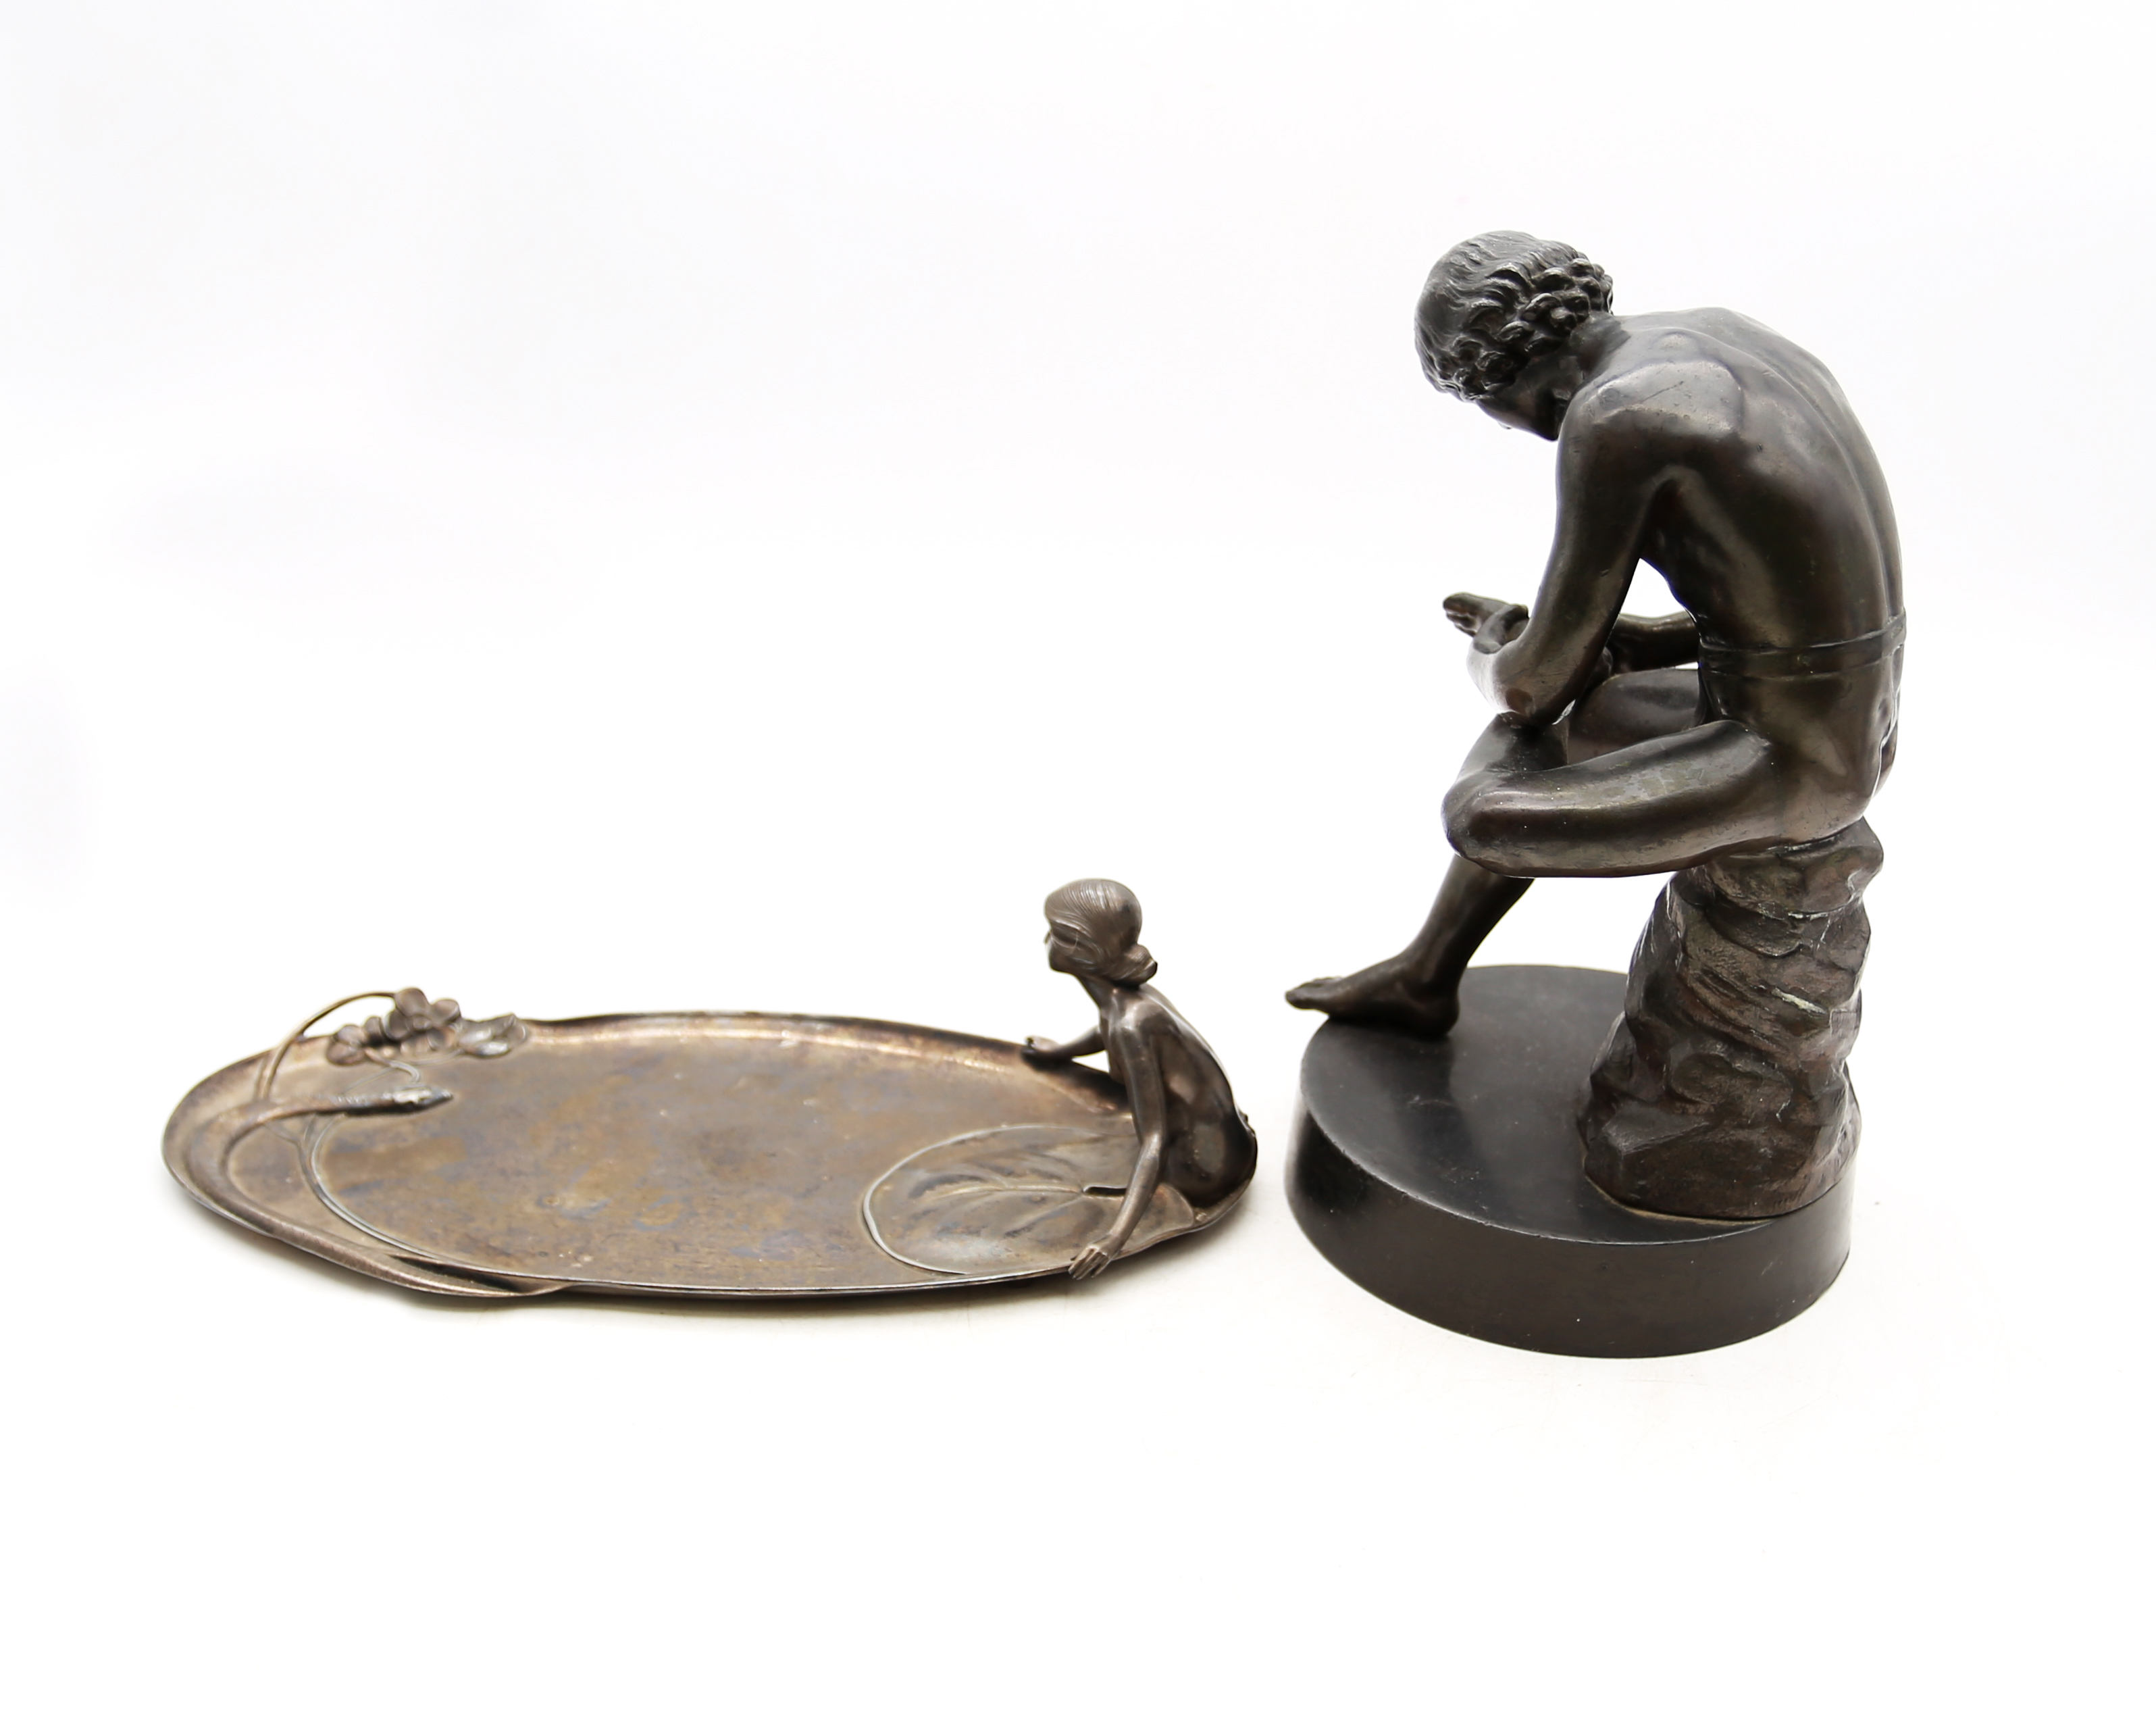 An early 20th Century WMF art nouveau pin dish along with a spelter figure of a classical man. - Image 2 of 7